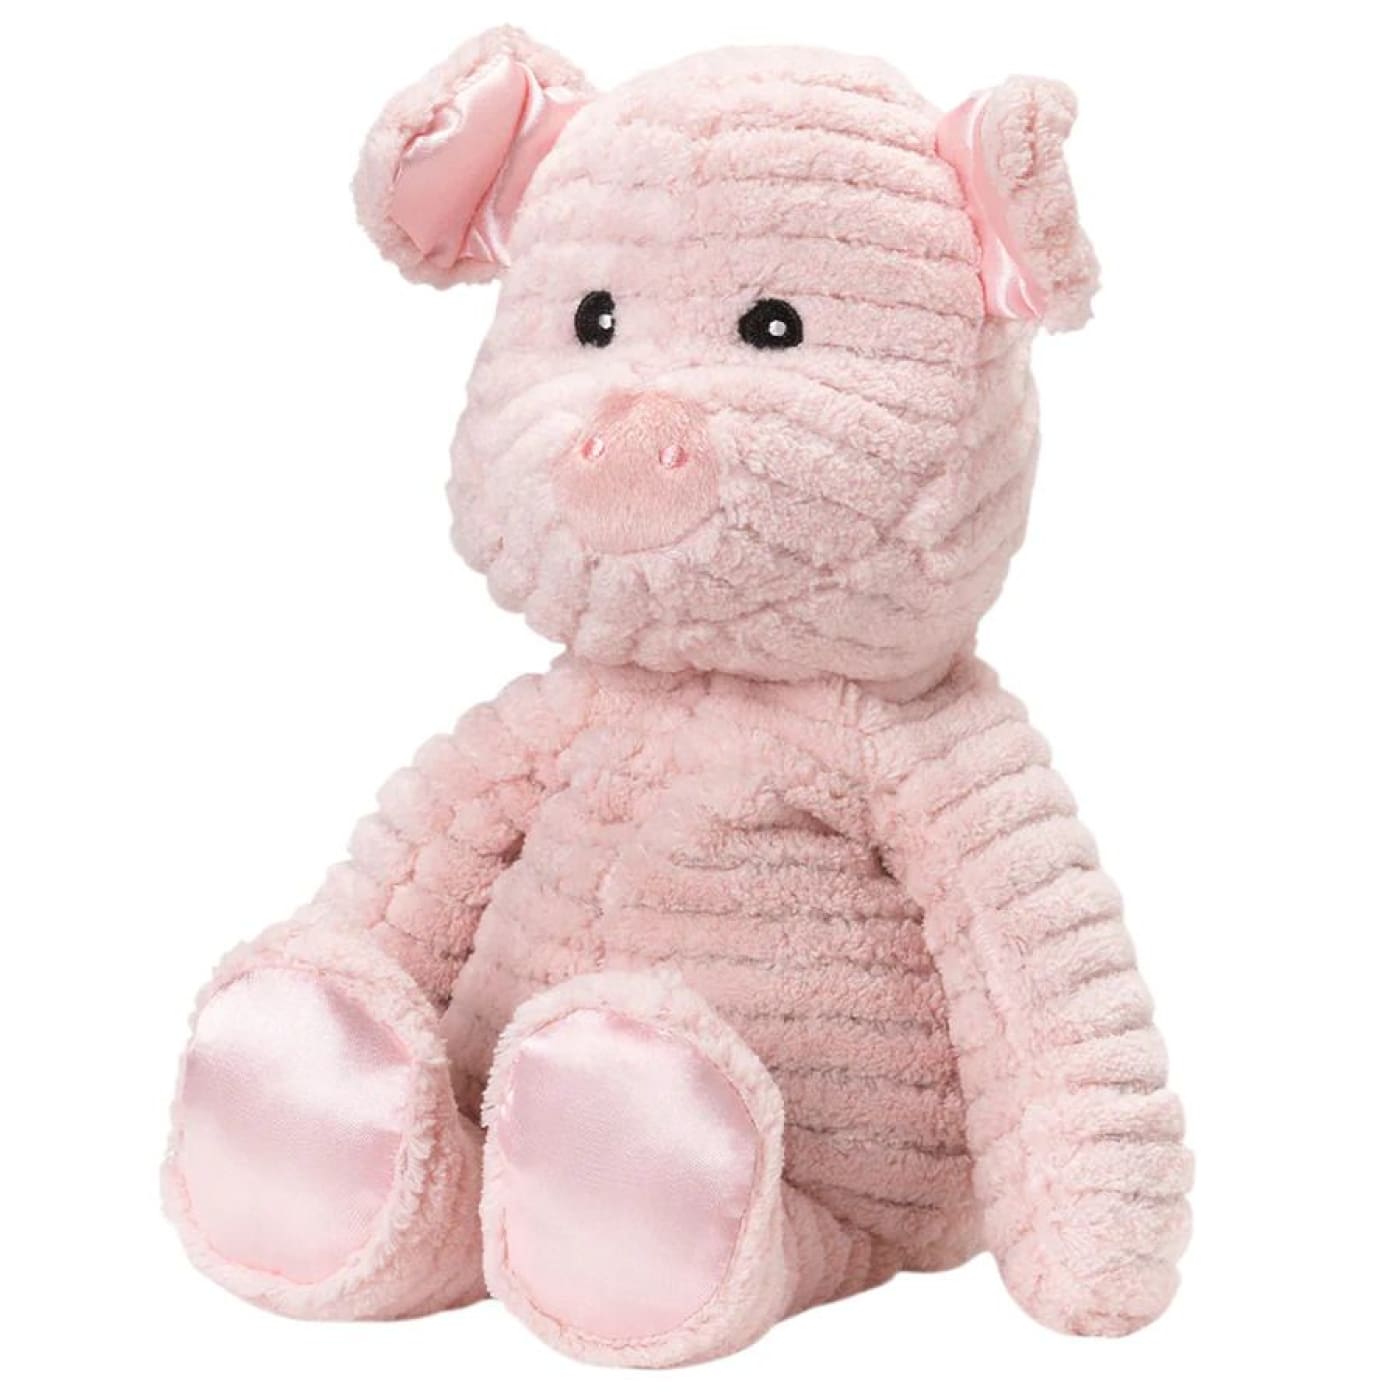 Warmies My First Heatable Soft Toy Scented with French Lavender - Pig - Pig - HEALTH & HOME SAFETY - THERMOMETERS/MEDICINAL